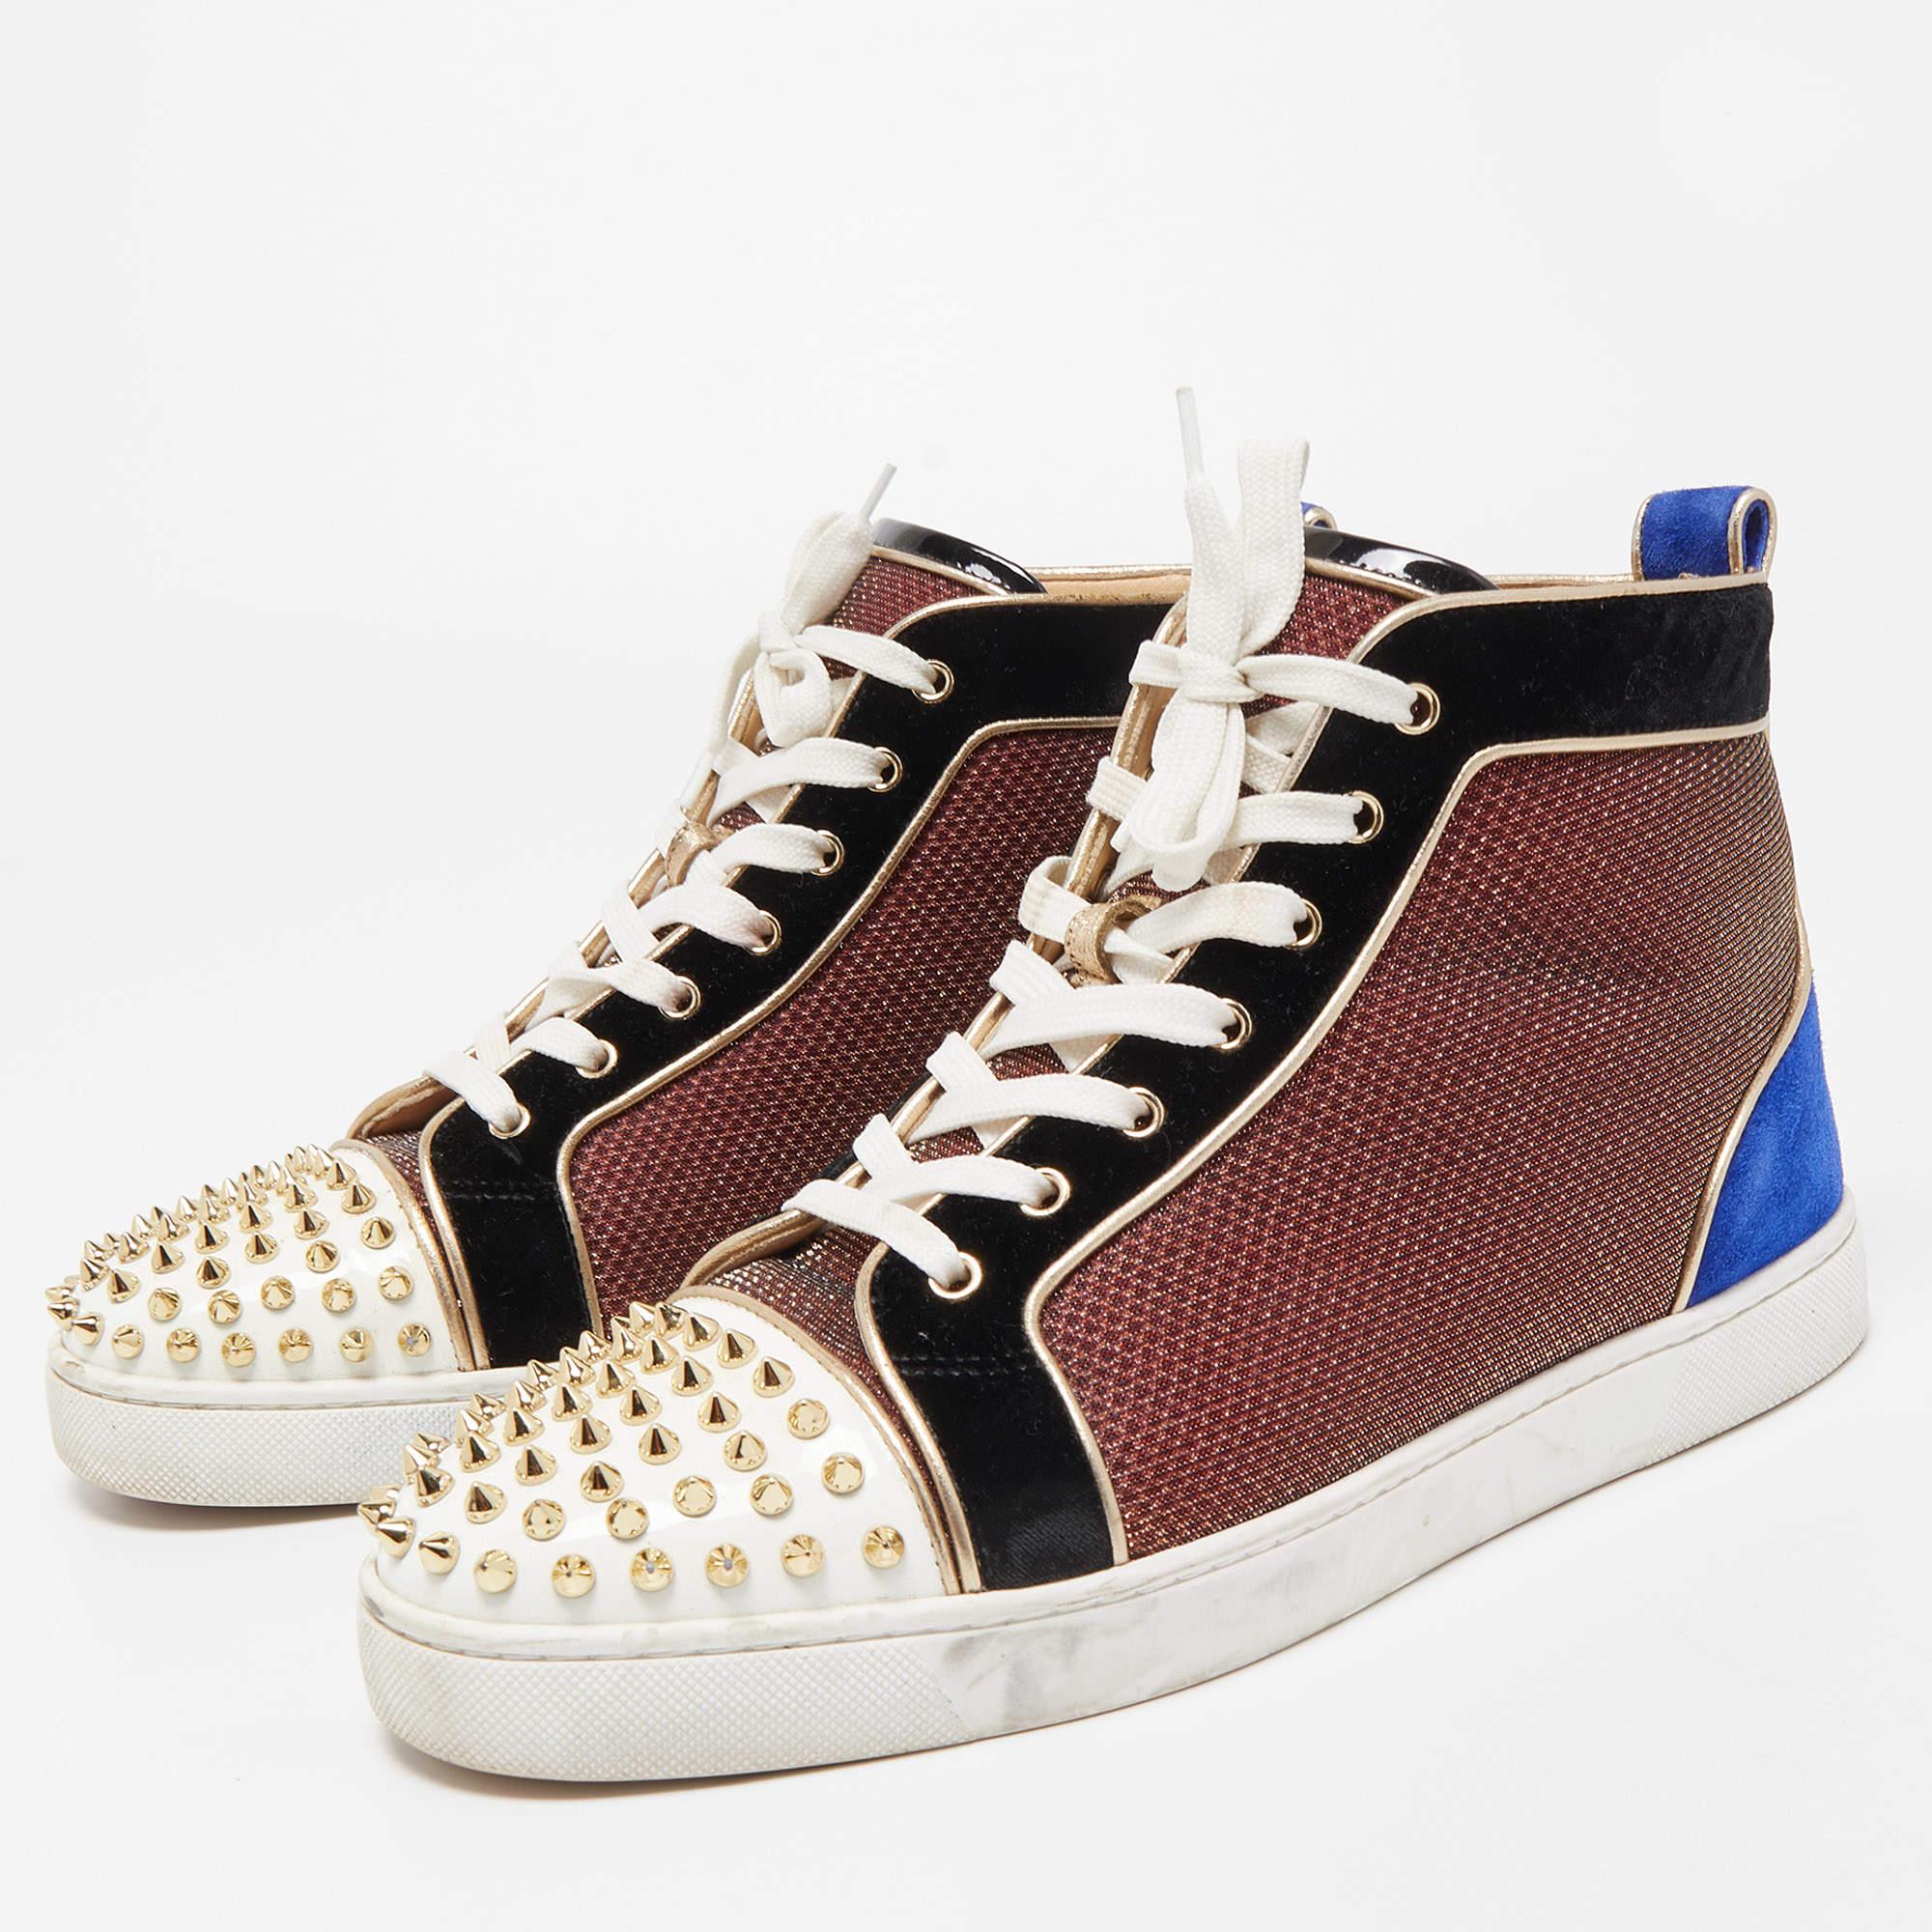 Men's Christian Louboutin Multicolor Fabric Louis Spike High Top Sneakers Size 42.5